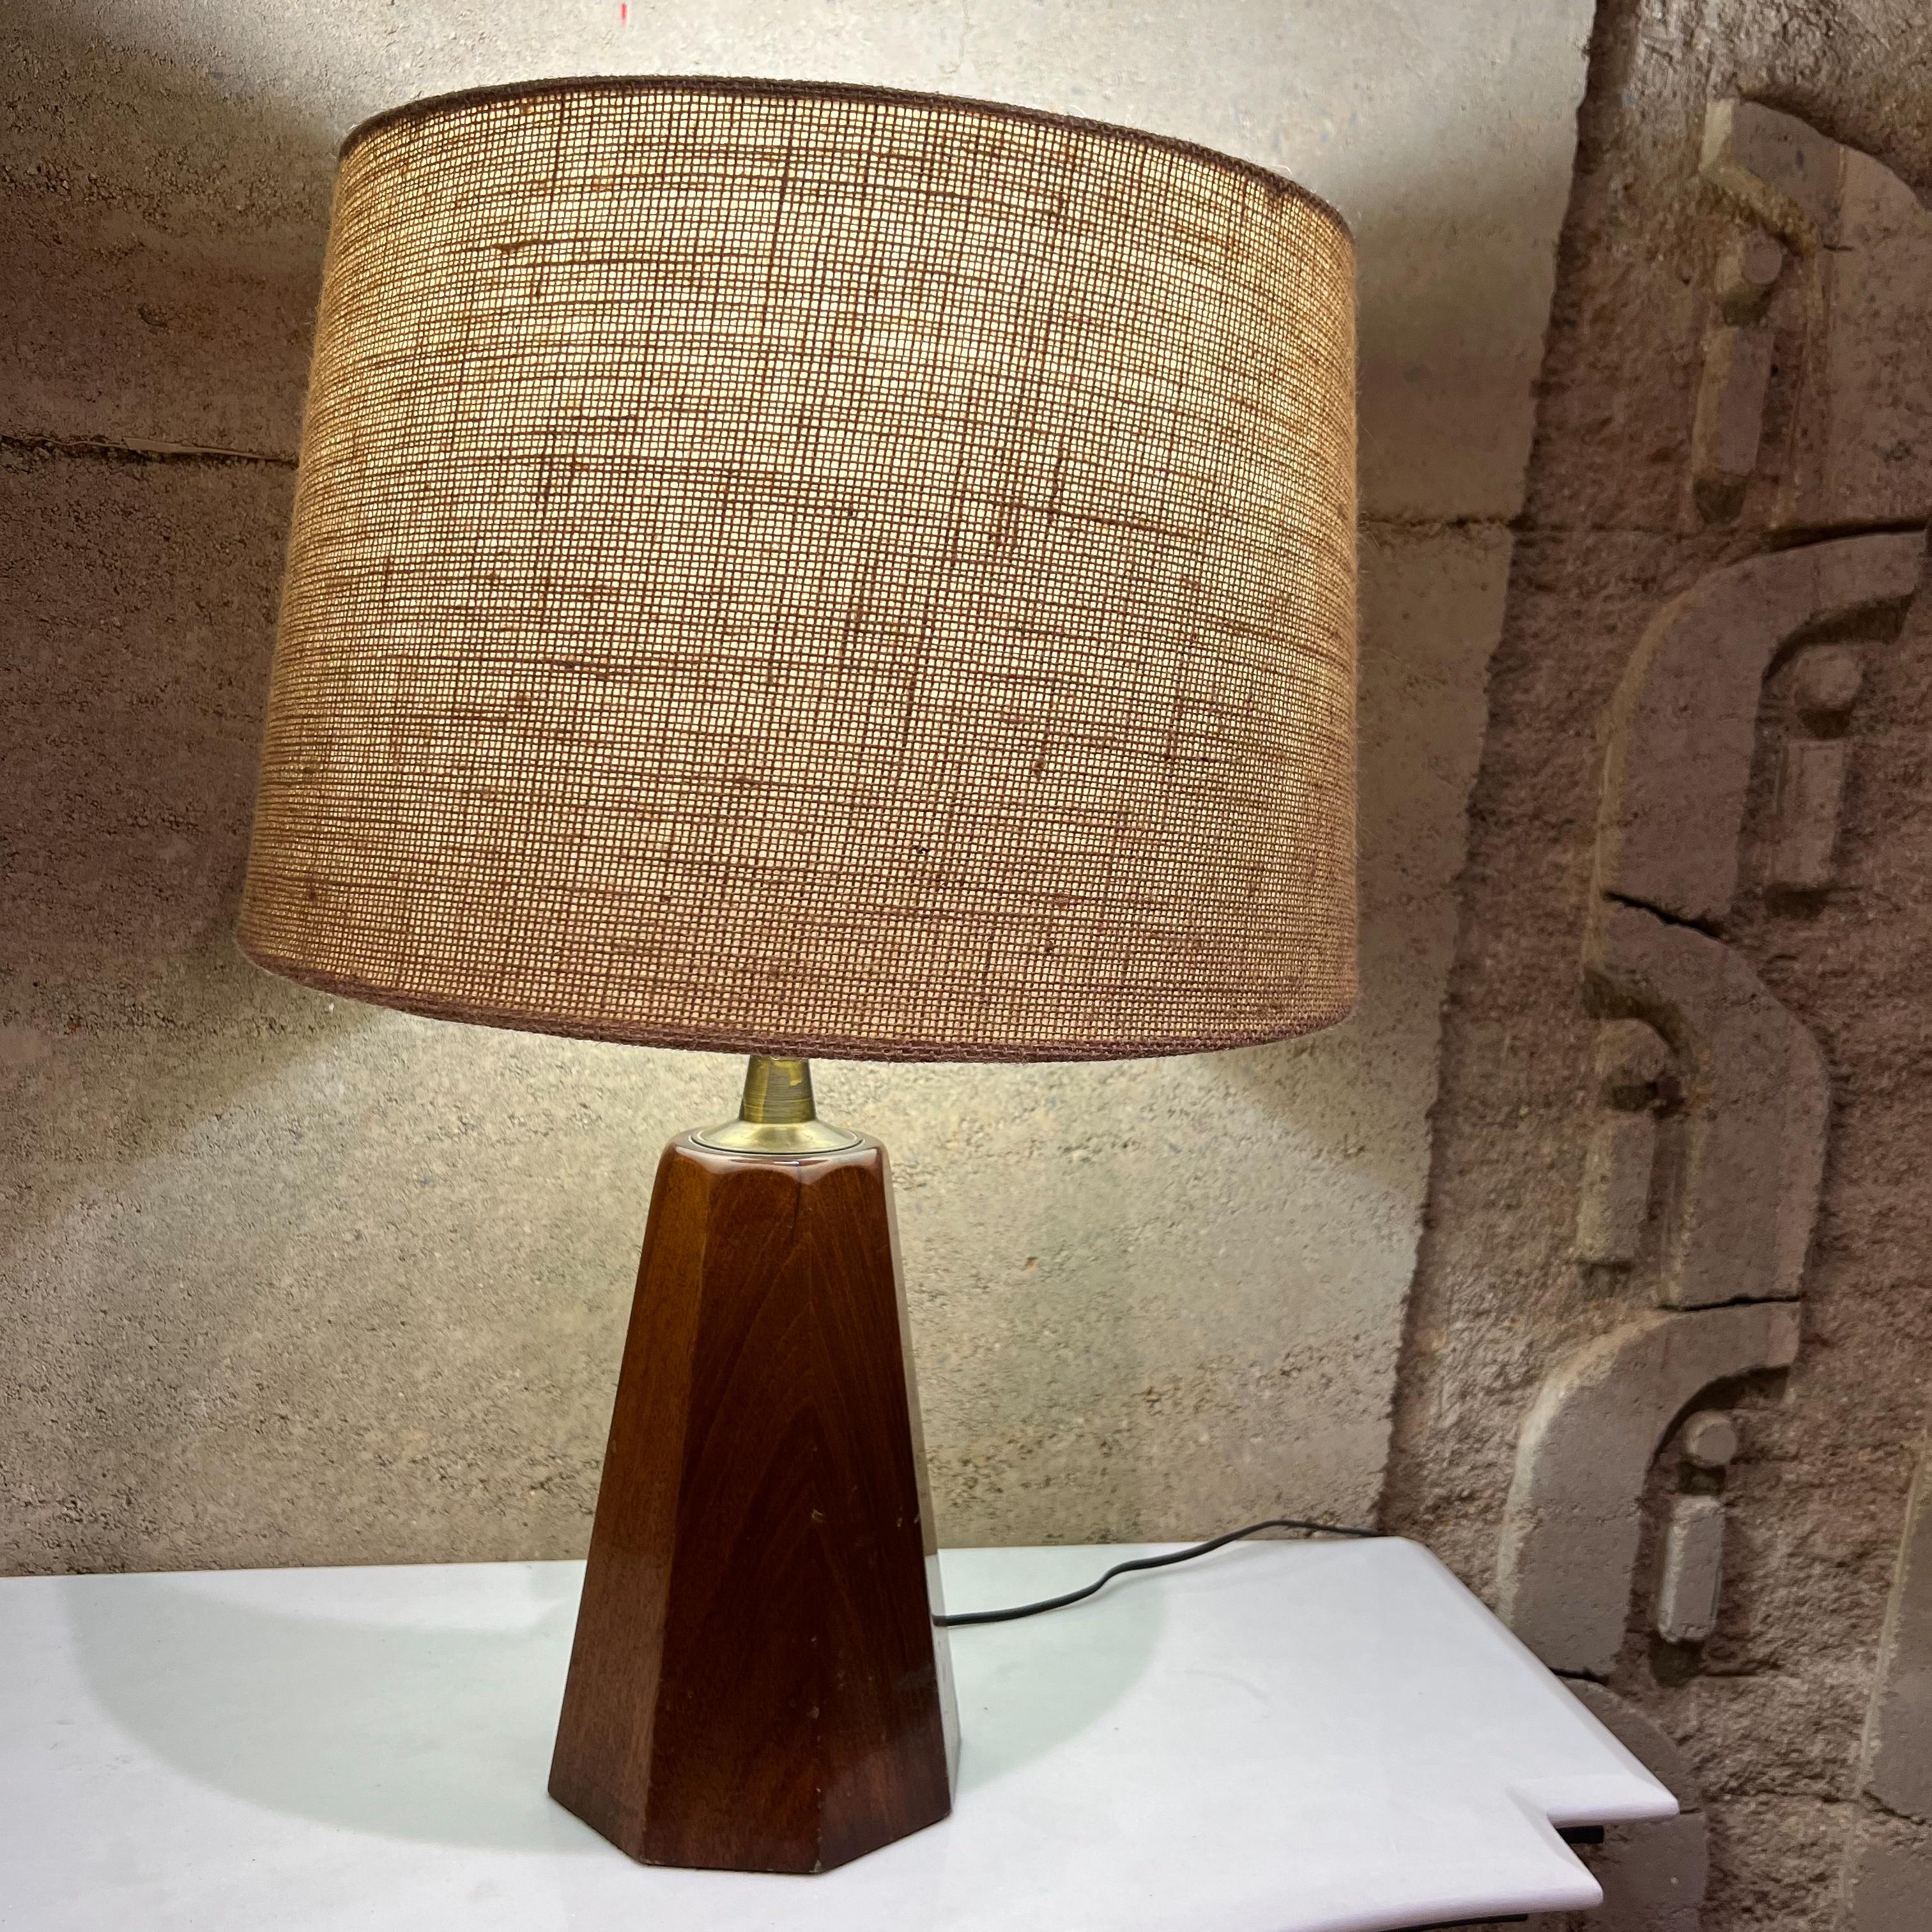 1950s modern table lamps in mahogany & brass by Angelita Mexico 
Pair of sculptural cedar wood or mahogany wood and brass table lamps.
Measures: 15.25 tall x 5.25 diameter
Retains stamp label from the maker.
No shade. Preowned vintage unrestored